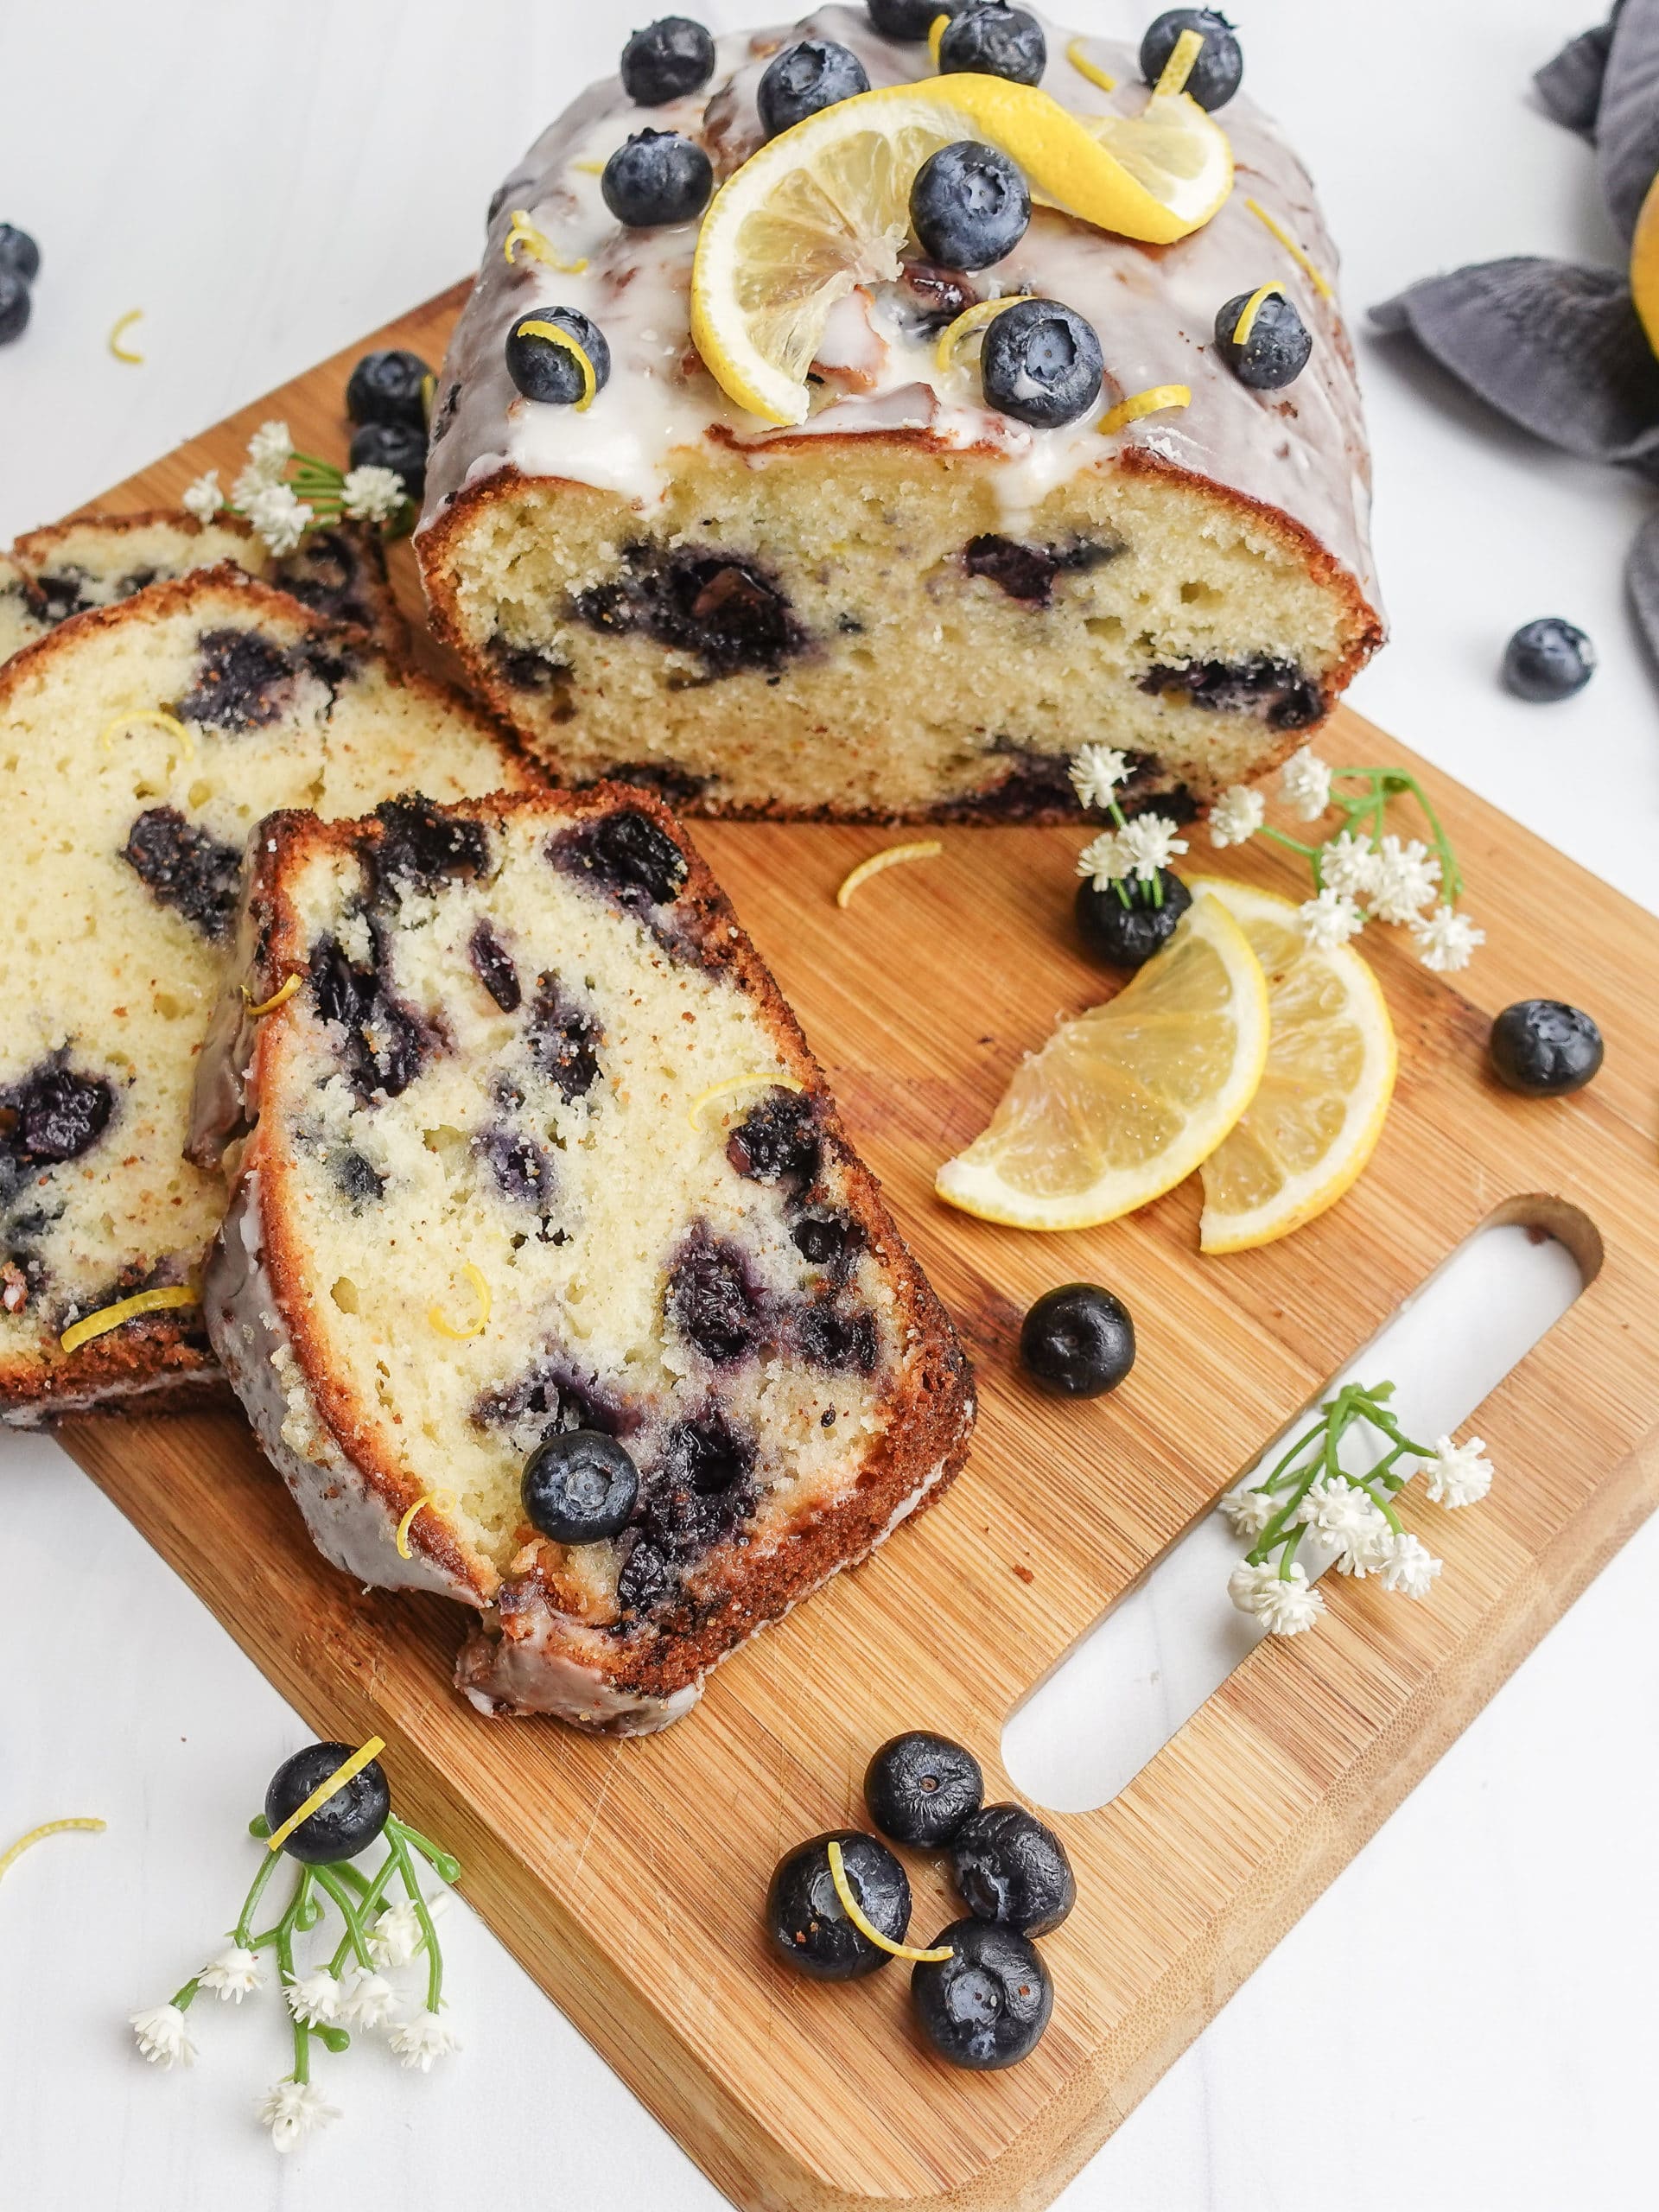 Overhead view of a sliced loaf of lemon blueberry bread with a white frosting, on a small wooden cutting board, decorated with lemon slices, blueberries and white flowers.